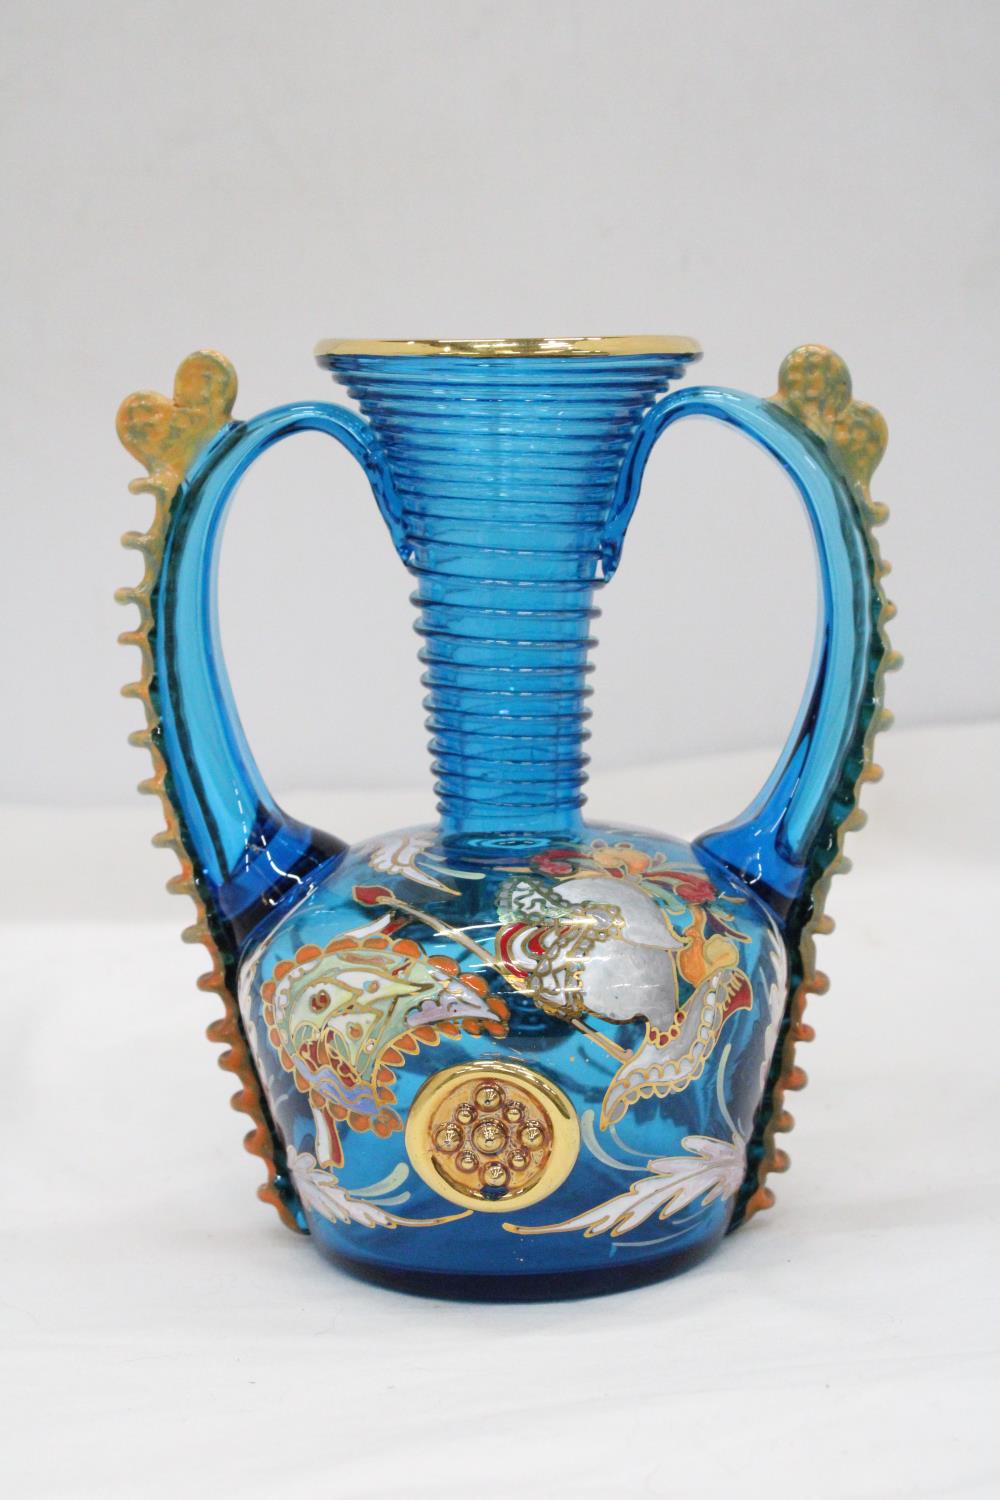 A 1960'S/70'S, LARGE ROYO GLASS VASE WITH GILDED ENAMEL DECORATION, HEIGHT 20CM - Image 2 of 6